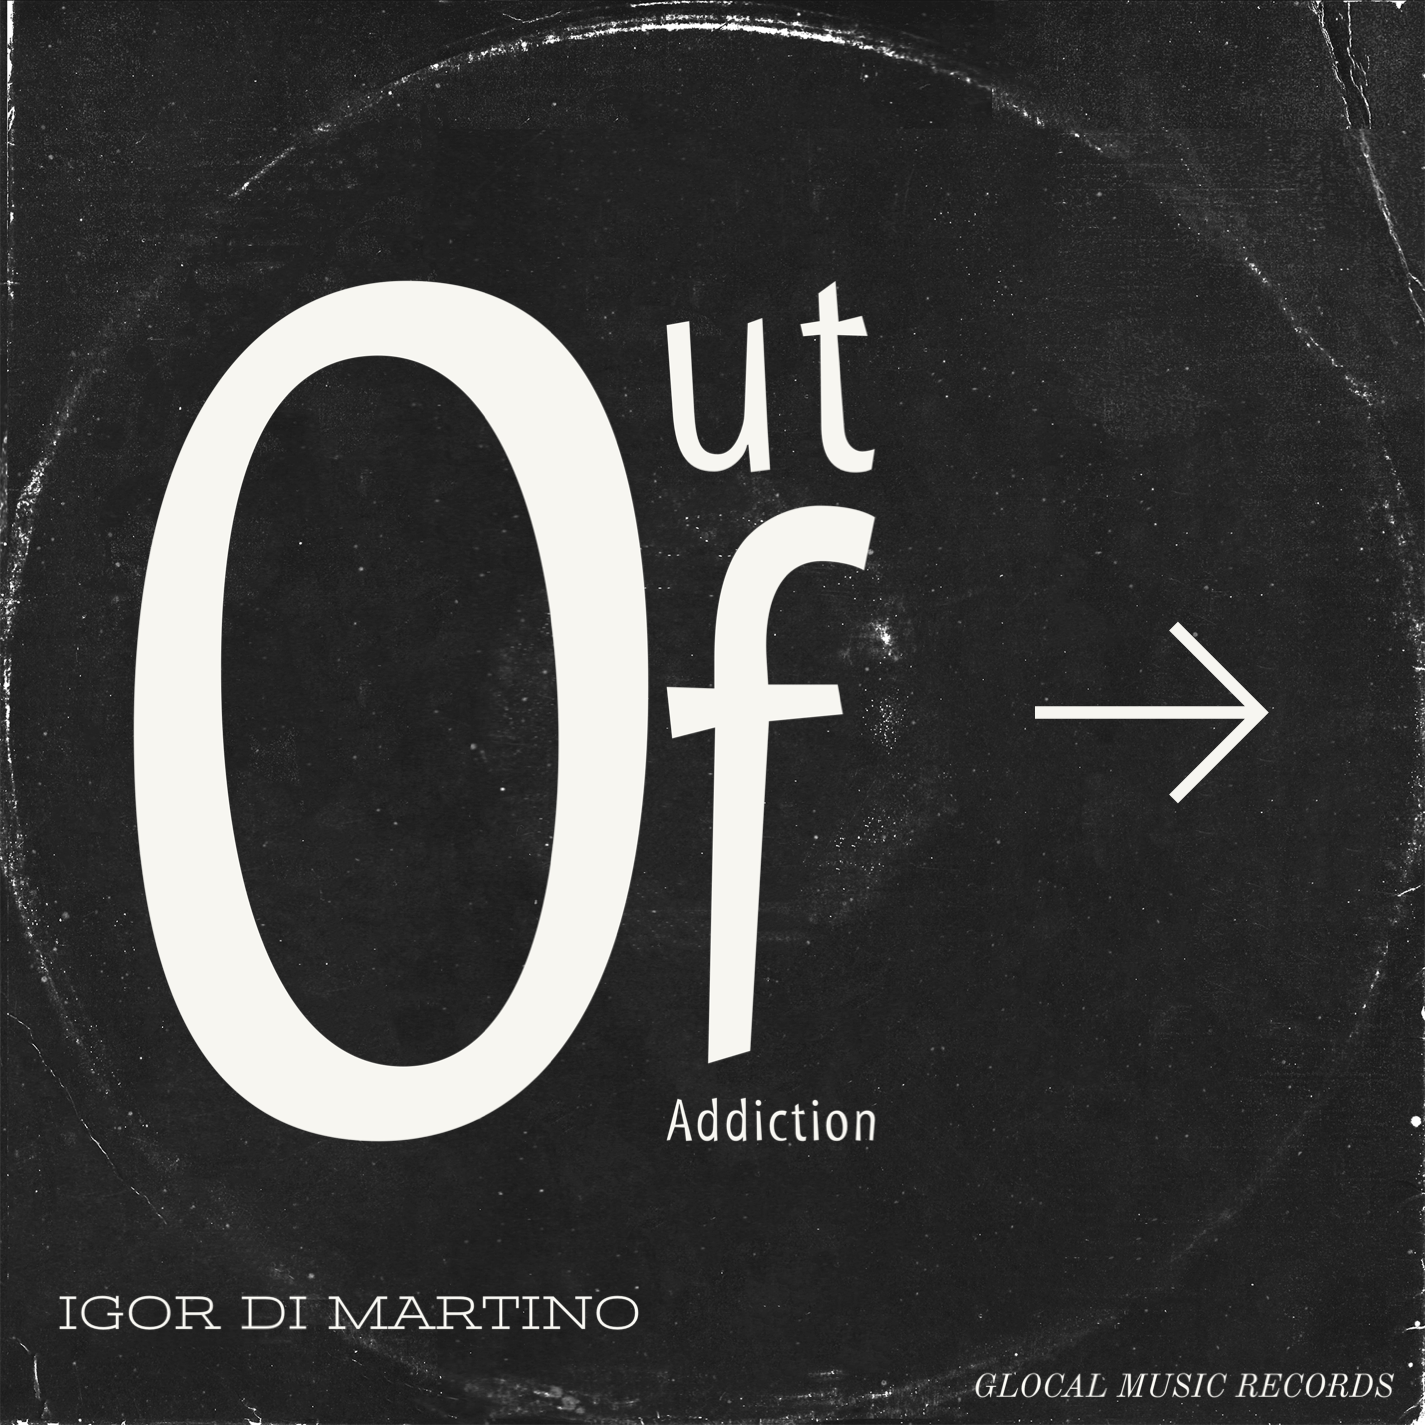 Igor Di Martino Trio "Out of addiction". The new album is on Spotify and all the digital music streaming services around the World. 